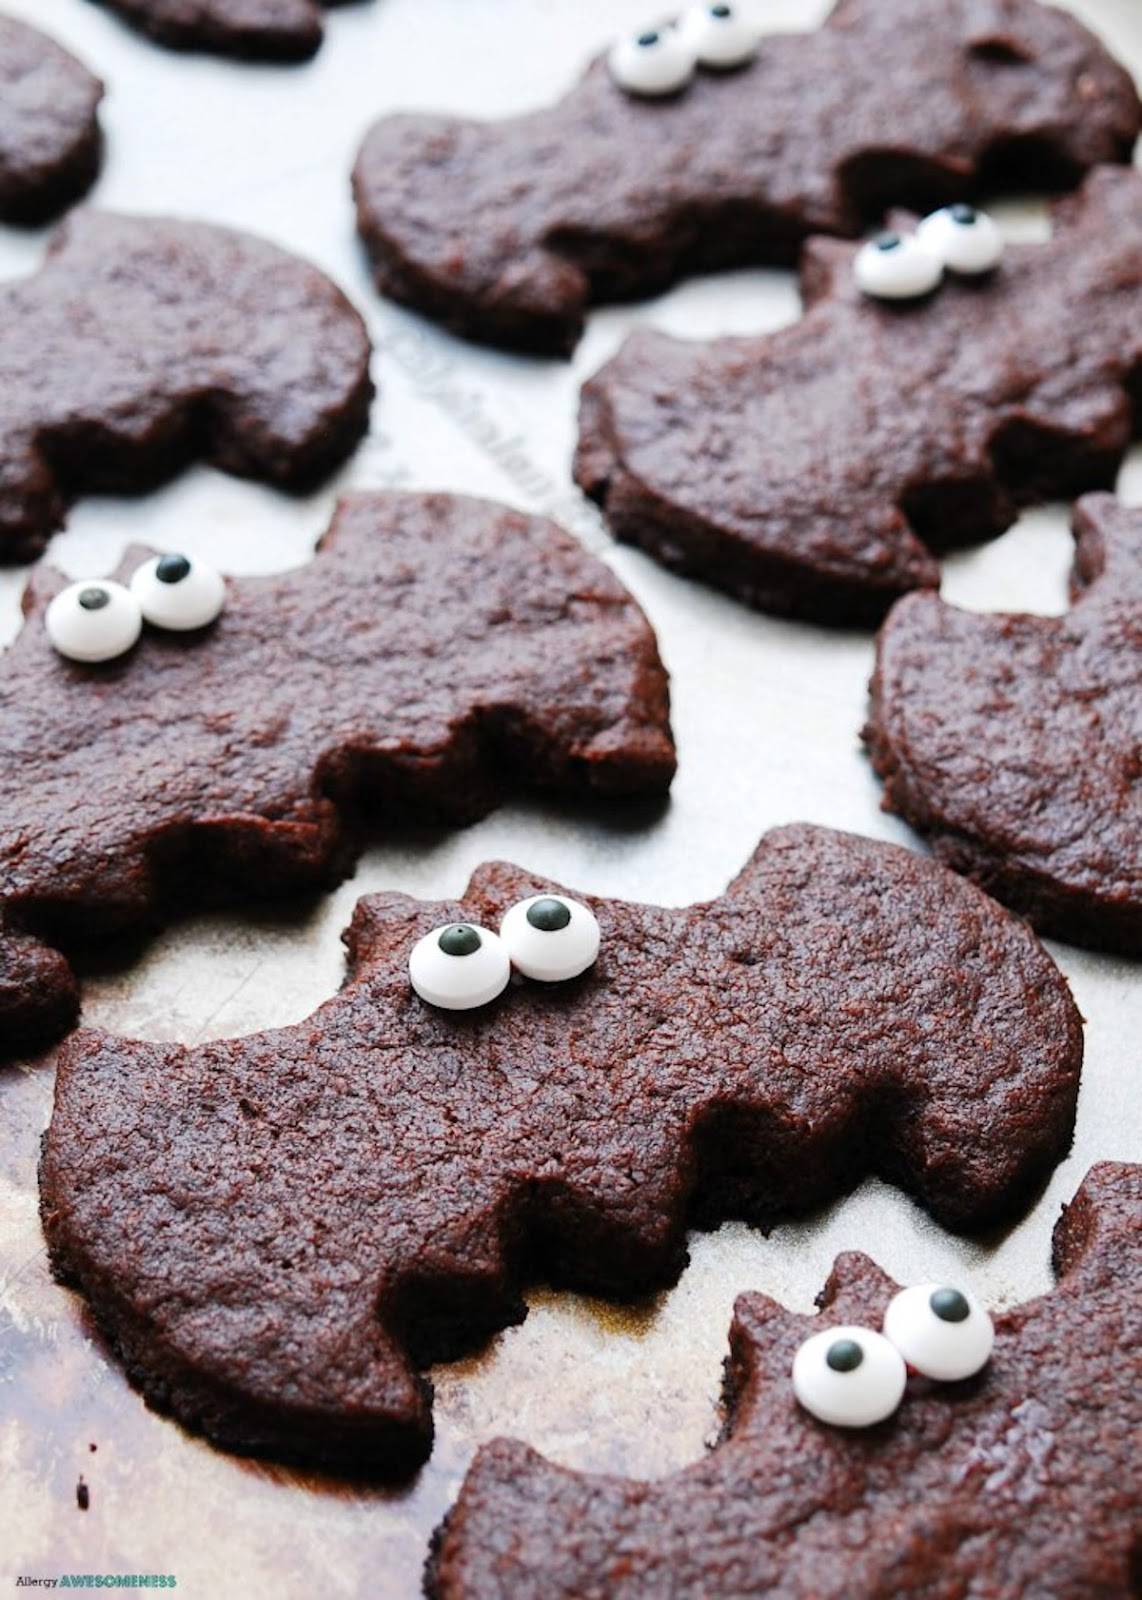 Sugar cookies shaped into bats to serve as healthy Halloween desserts.